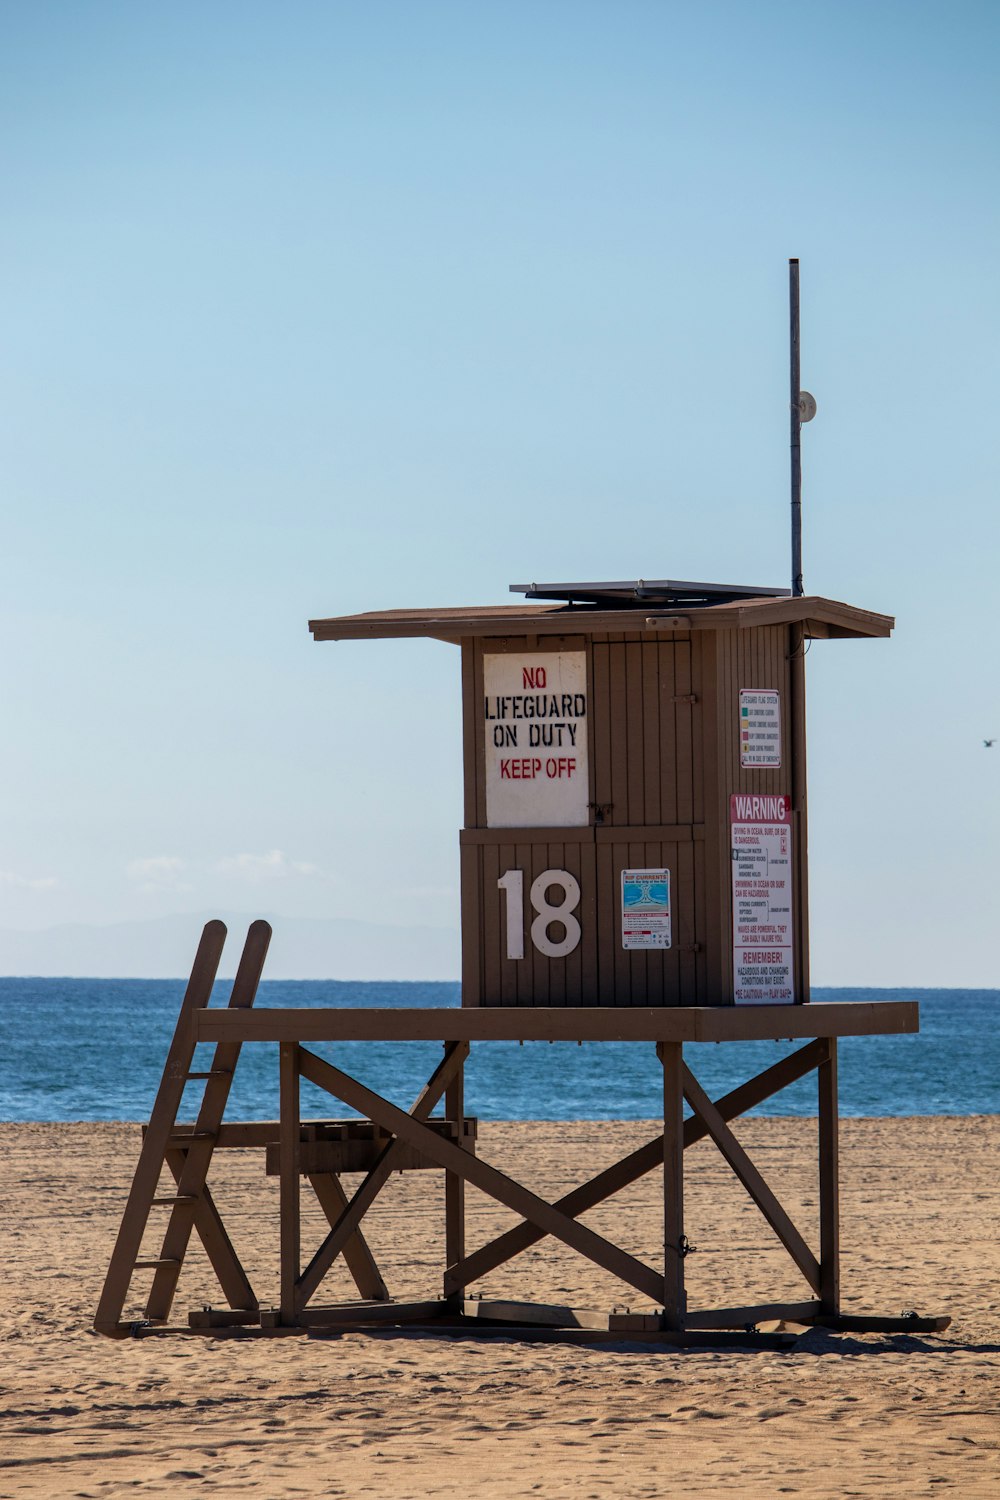 a lifeguard stand on the beach with a lifeguard flag